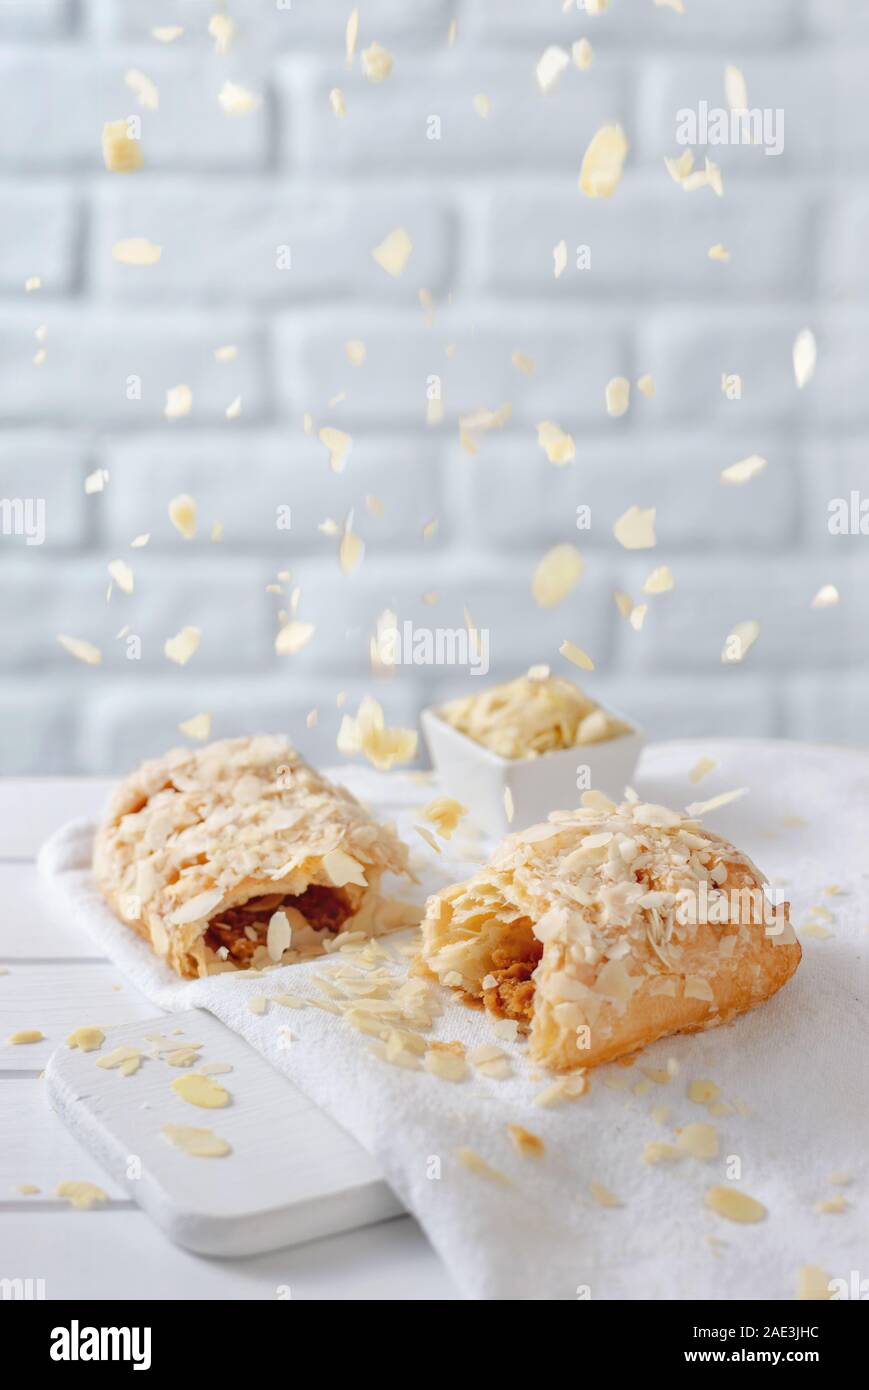 Almond flakes falling from above over caramel strudel on white brick background Stock Photo